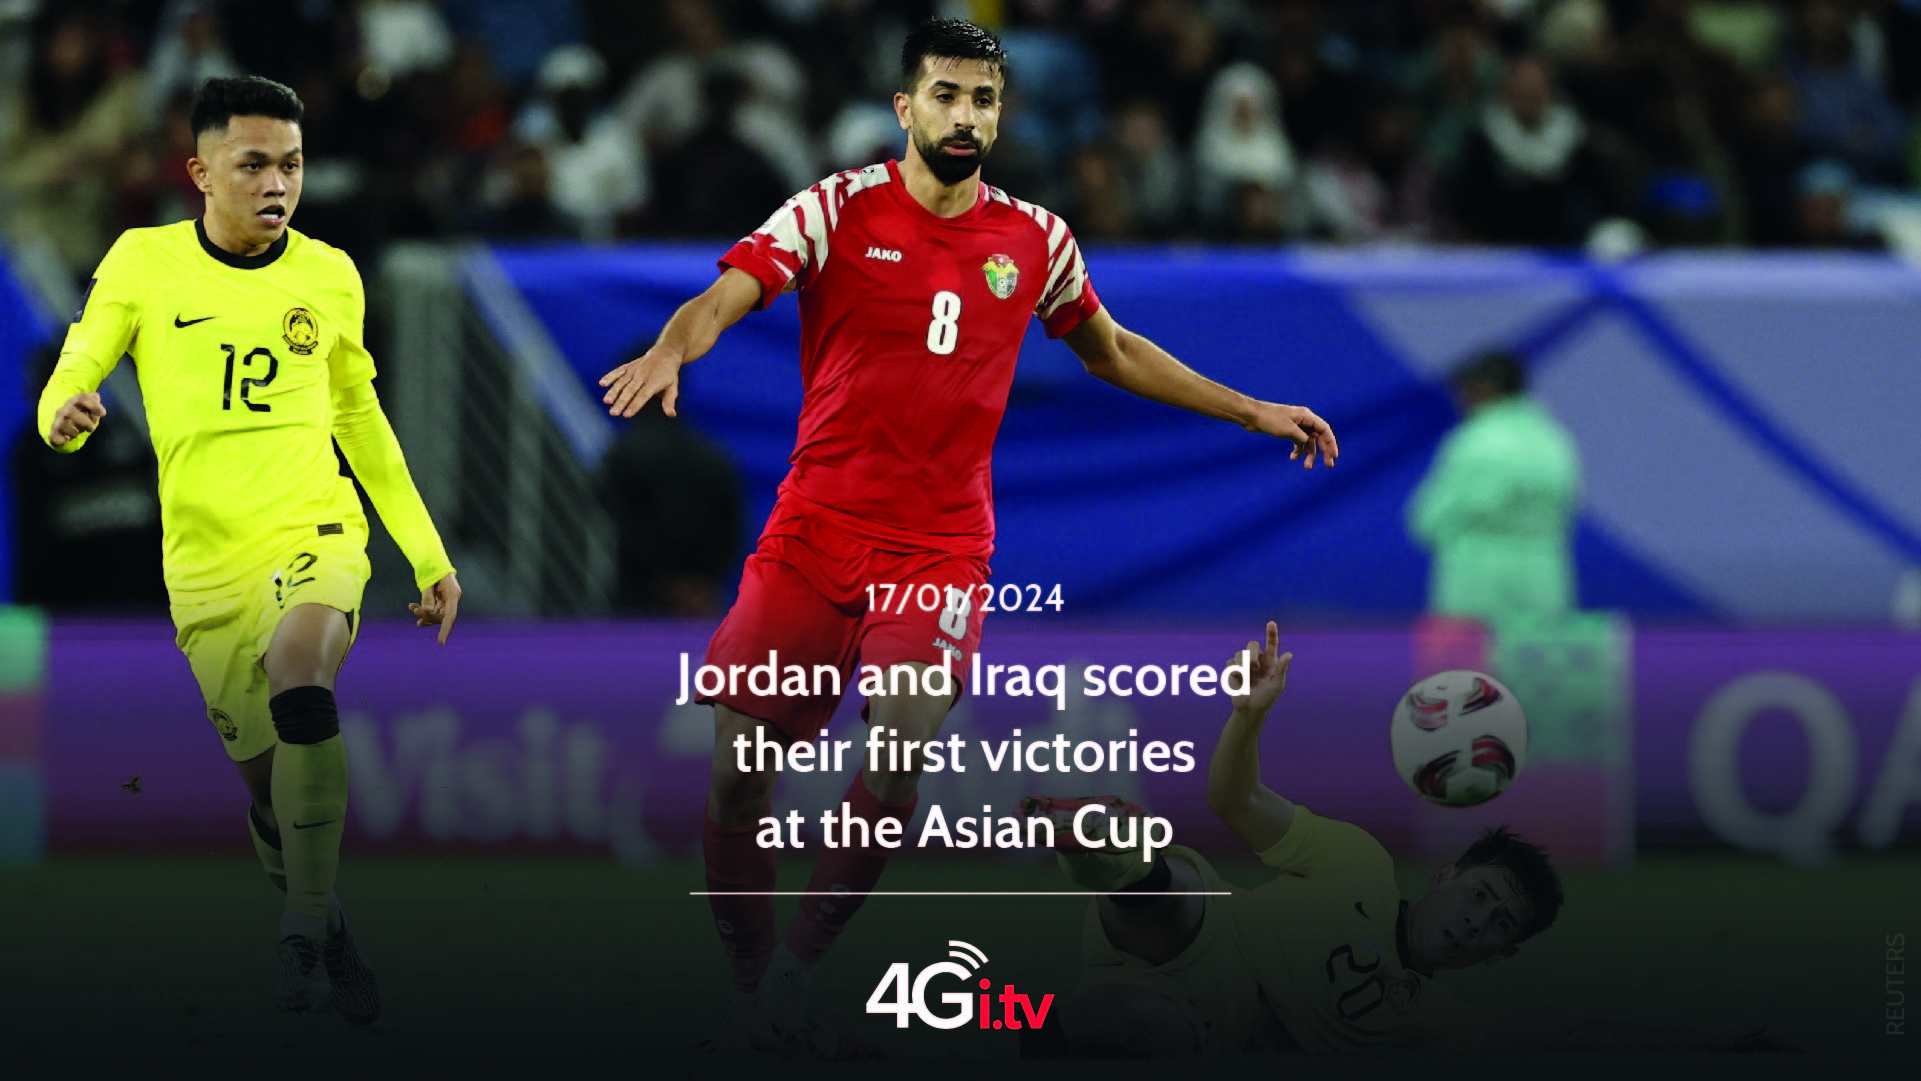 Read more about the article Jordan and Iraq scored their first victories at the Asian Cup 